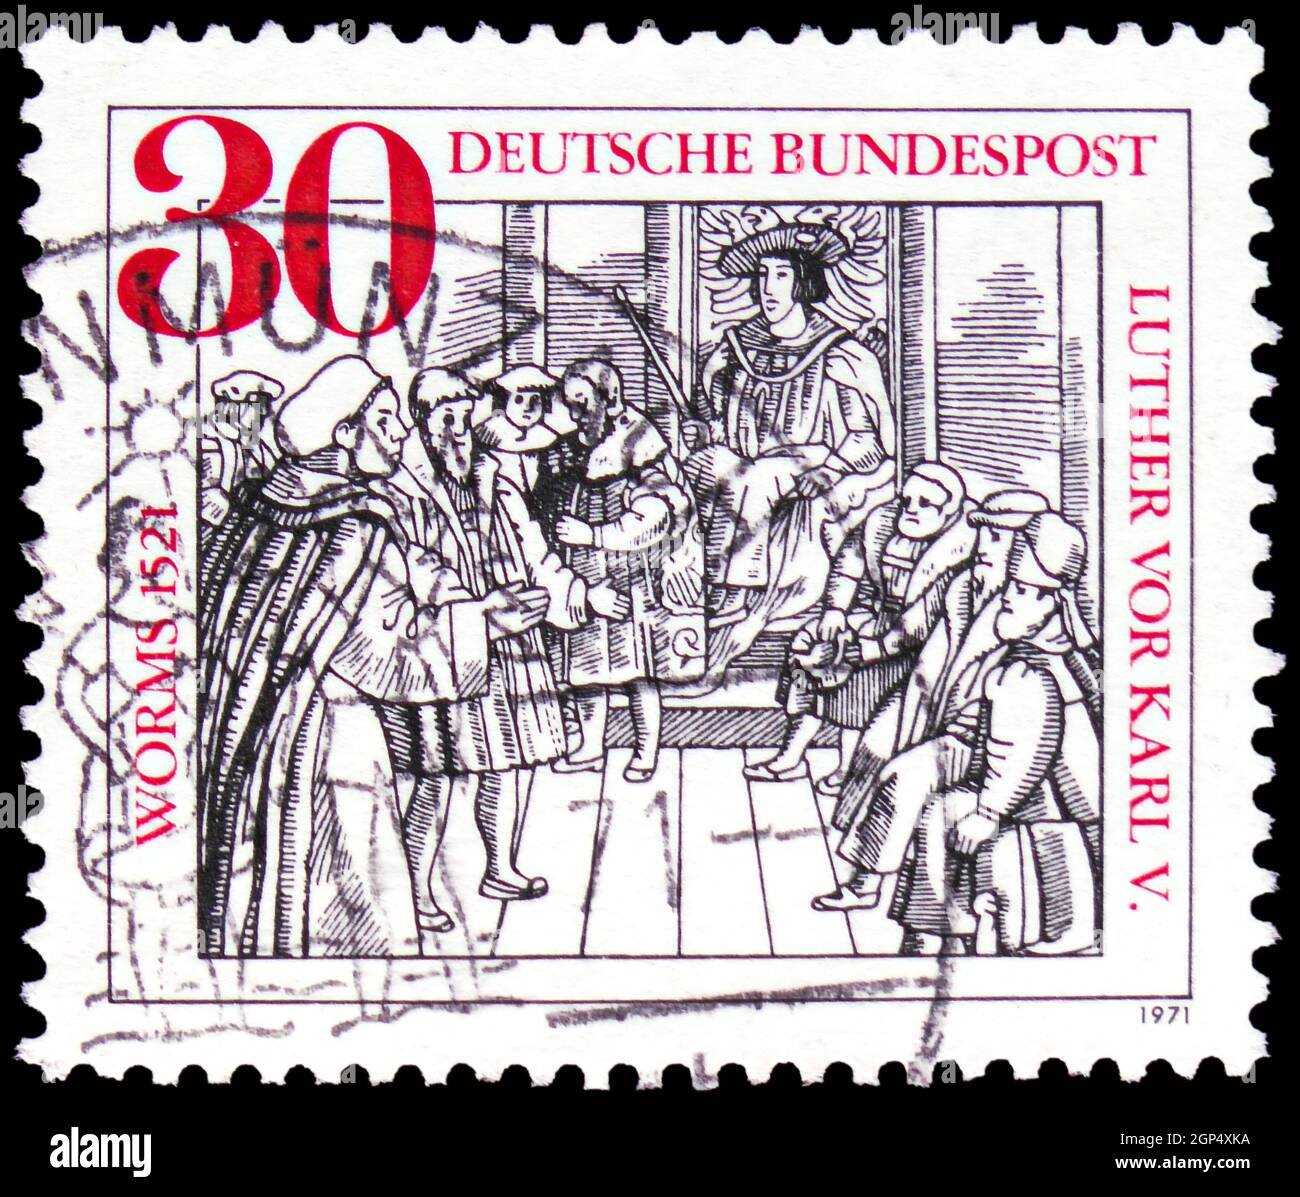 MOSCOW, RUSSIA - AUGUST 4, 2021: Postage stamp printed in Germany shows Martin Luther and Kaiser Karl V at the diet, serie, circa 1971 Stock Photo